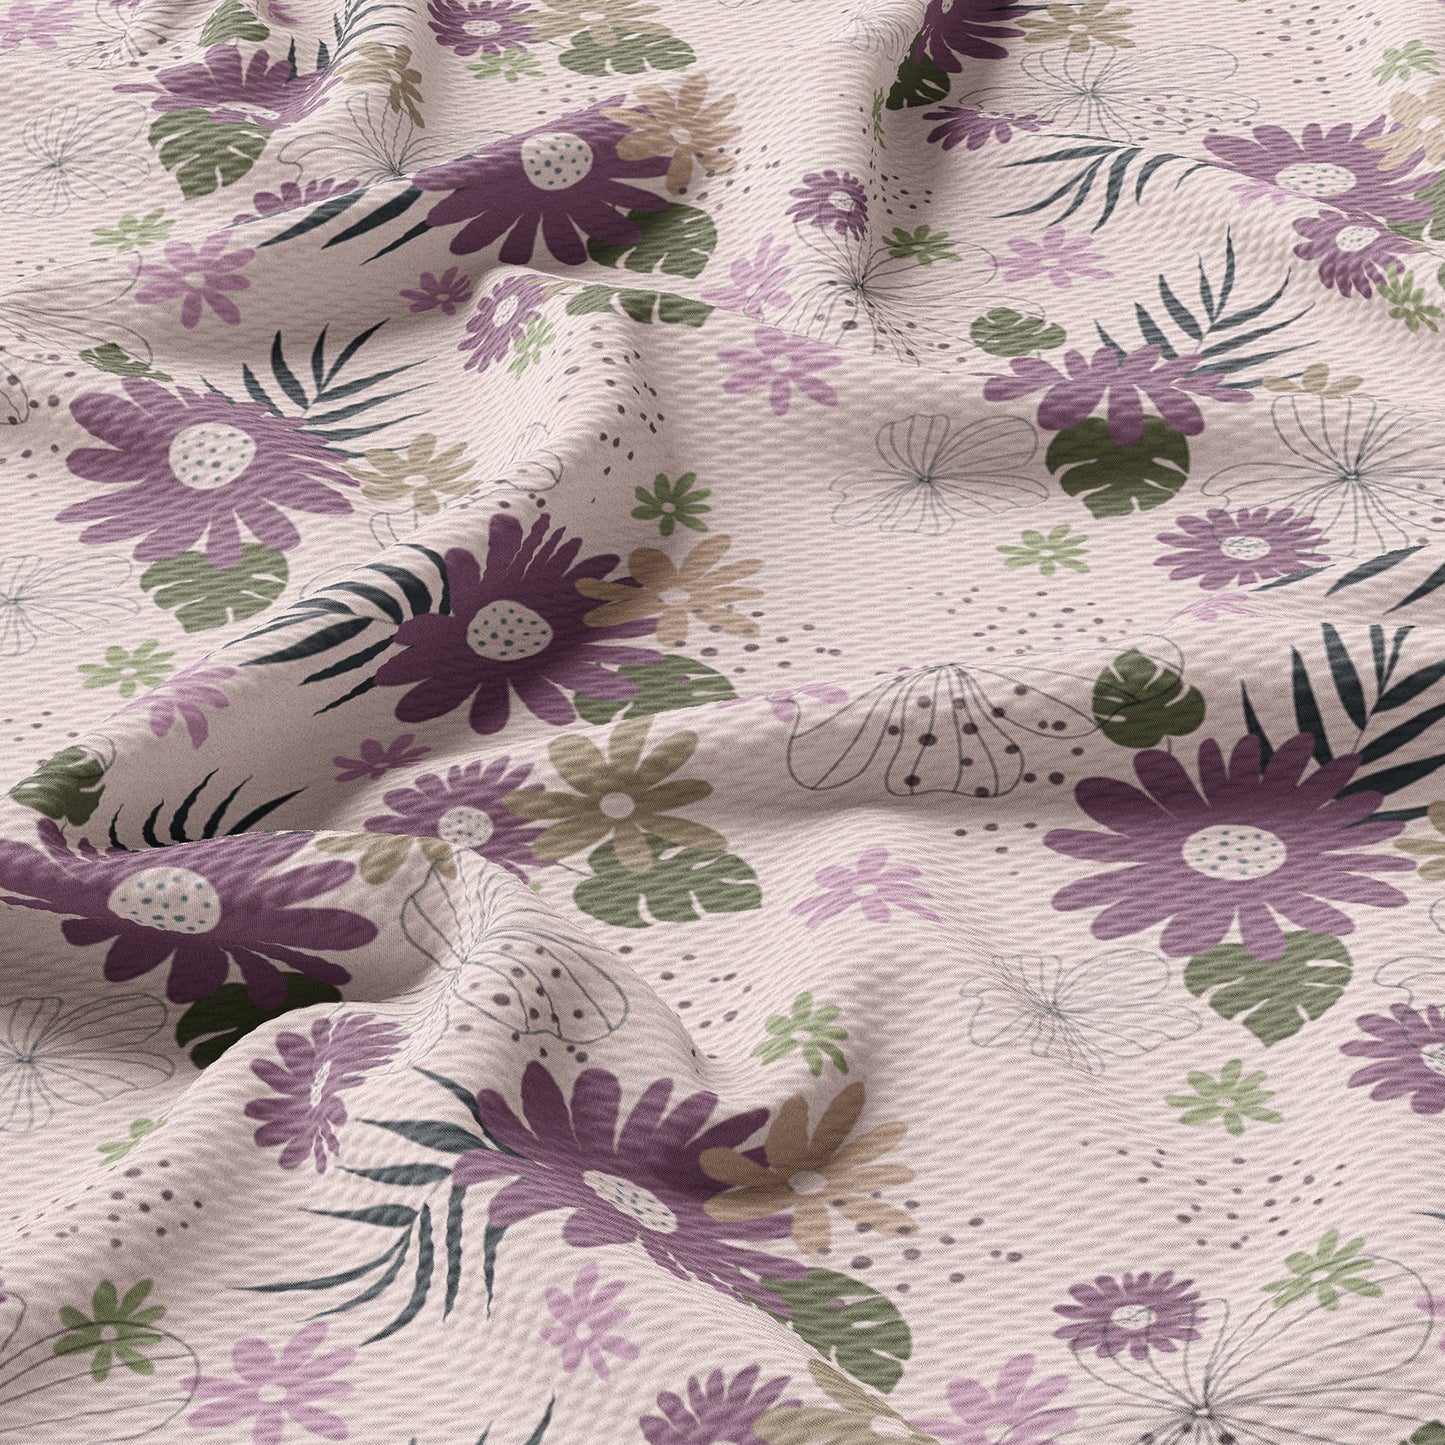 Floral l Bullet Textured Fabric by the yard AA1636